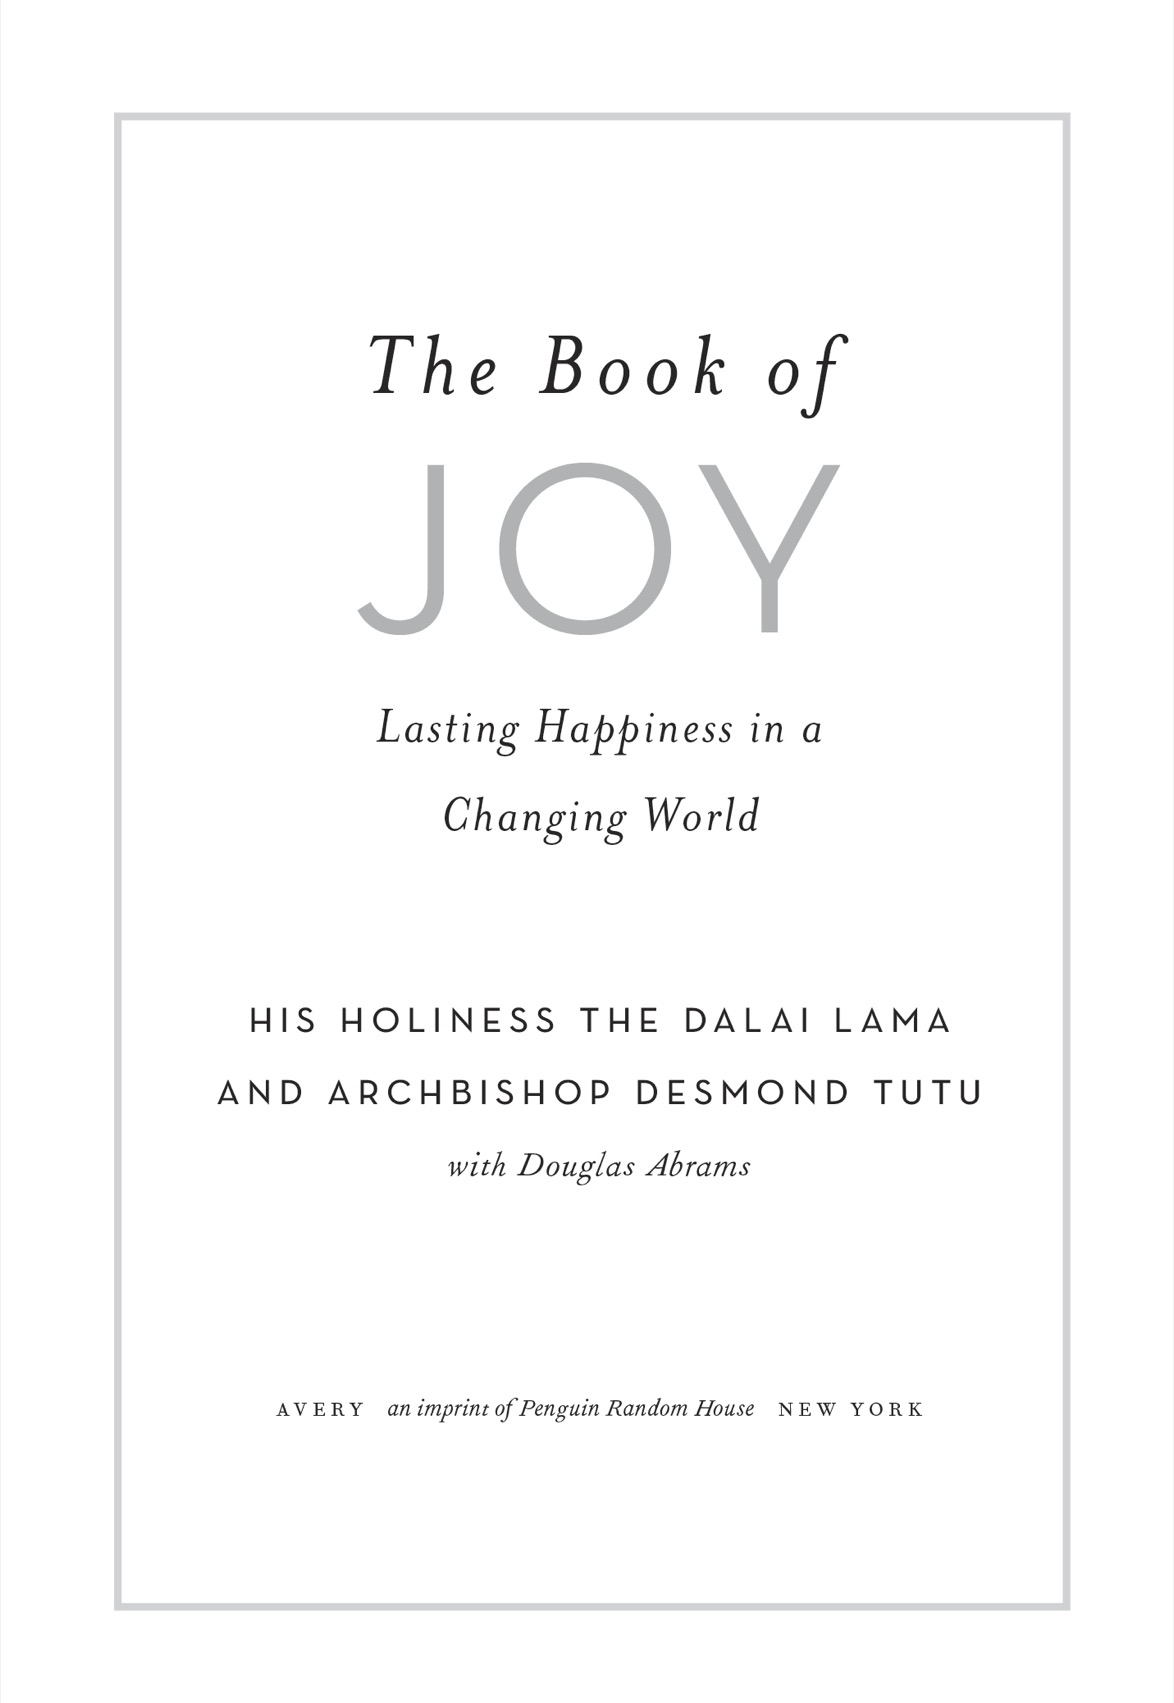 The Book of Joy - image 3